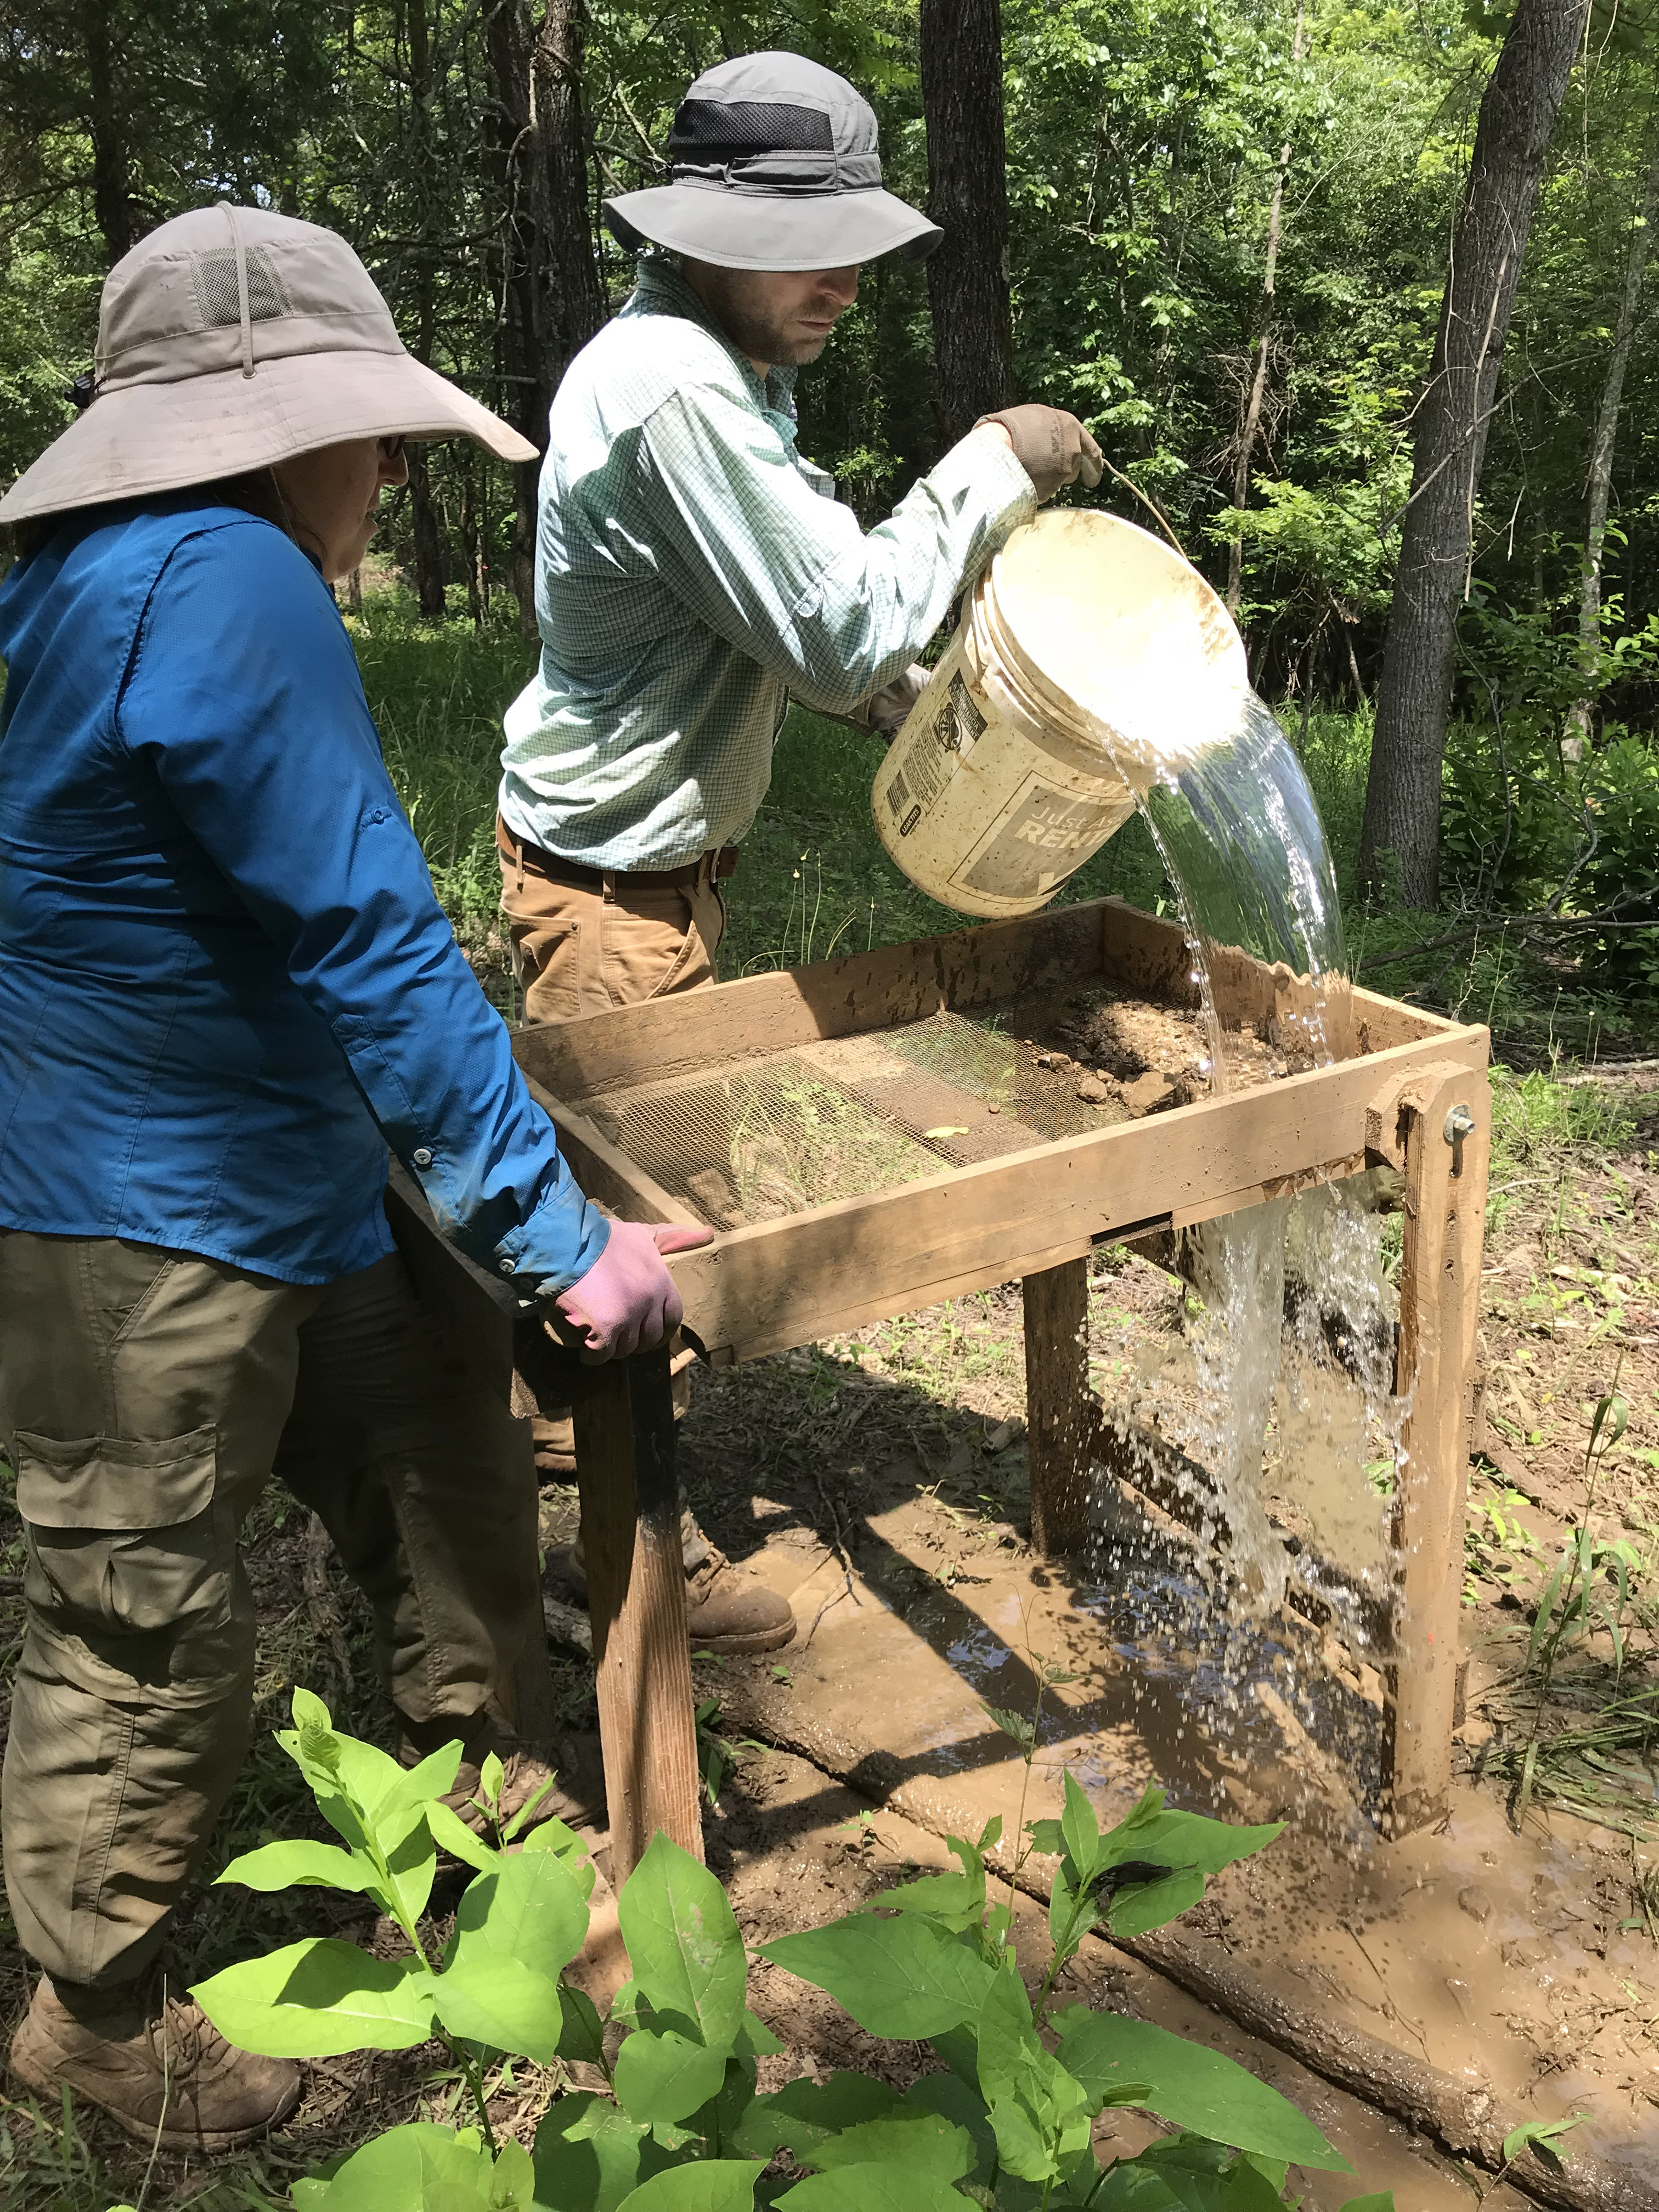 Project lead, Dr. Kevin Fogle and Field Director, Dr. Kelly Goldberg employ water screening techniques to find artifacts in the waterlogged clay soils.